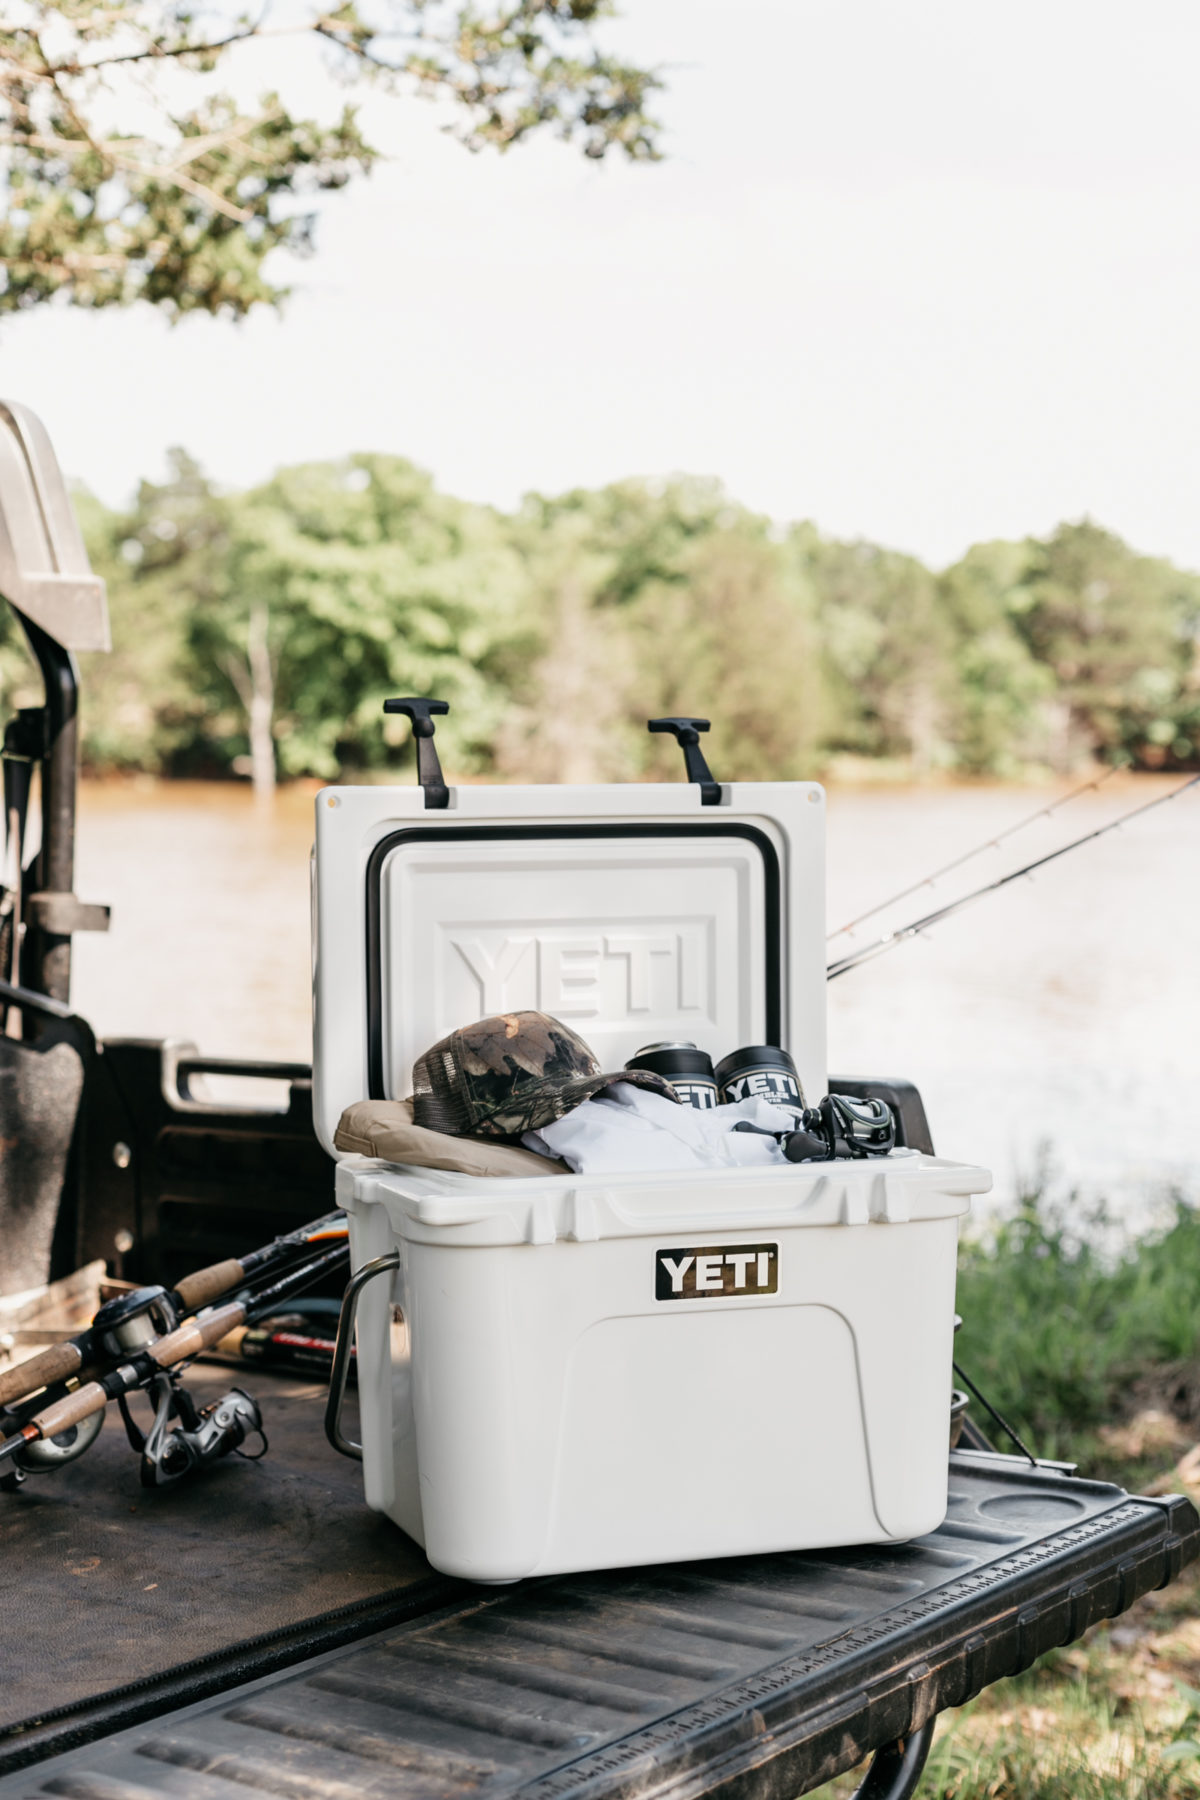 FATHER'S DAY GIFTS - Yeti cooler and can holders - One Small Blonde Blog